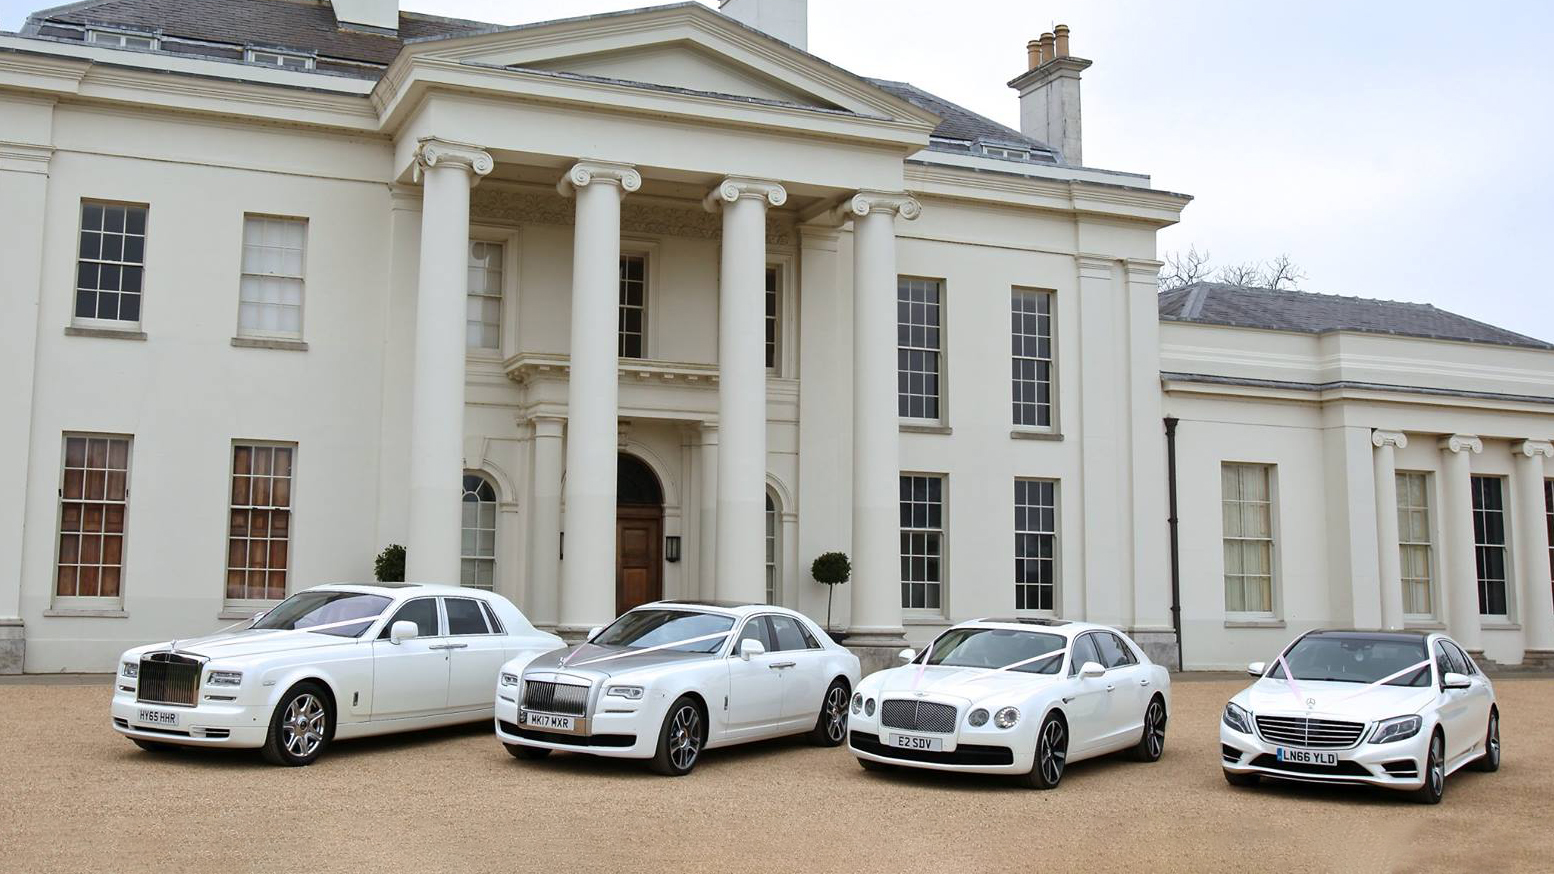 A selection of white Luxurious and modern vehicles all decorated with matching white ribbons on wedding duties in Biggleswade. Frot Left to right: Rolls-Royce Phantom, Rolls-Royce 